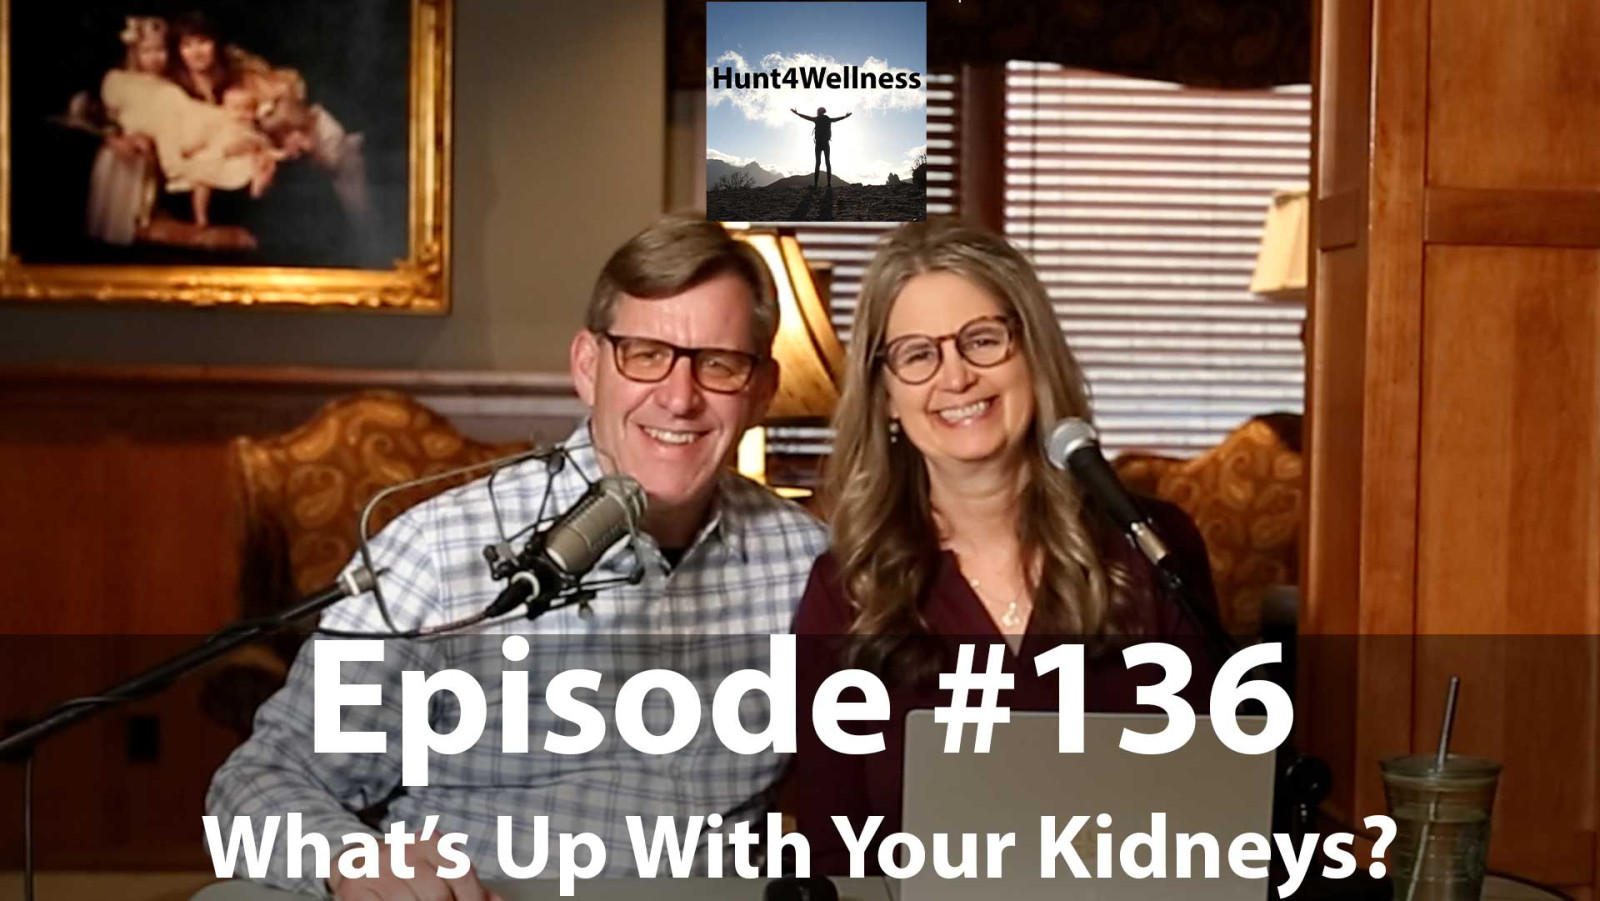 Episode #136 - What's Up With Your Kidneys?